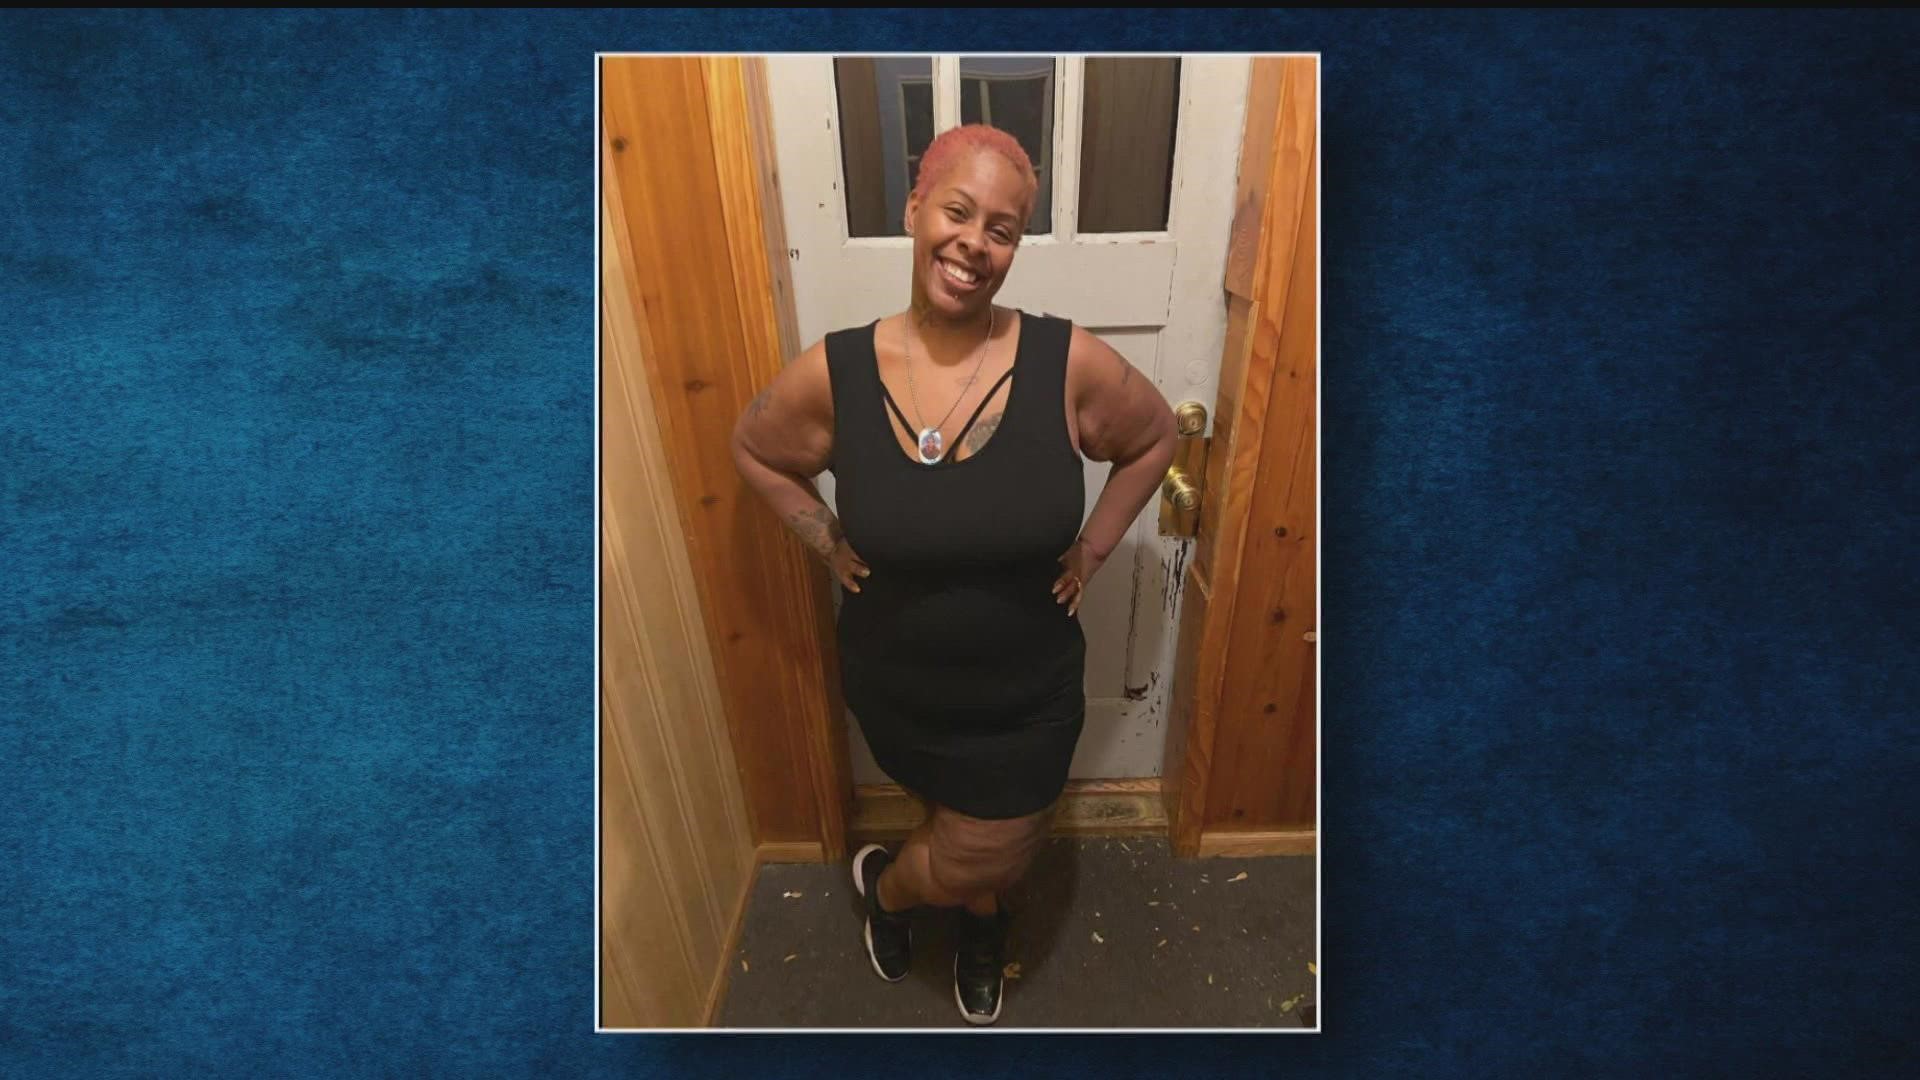 A St. Paul mother of four has been identified as the latest homicide victim in that city.
Lashonda Nix is the 39th person murdered in St. Paul this year.